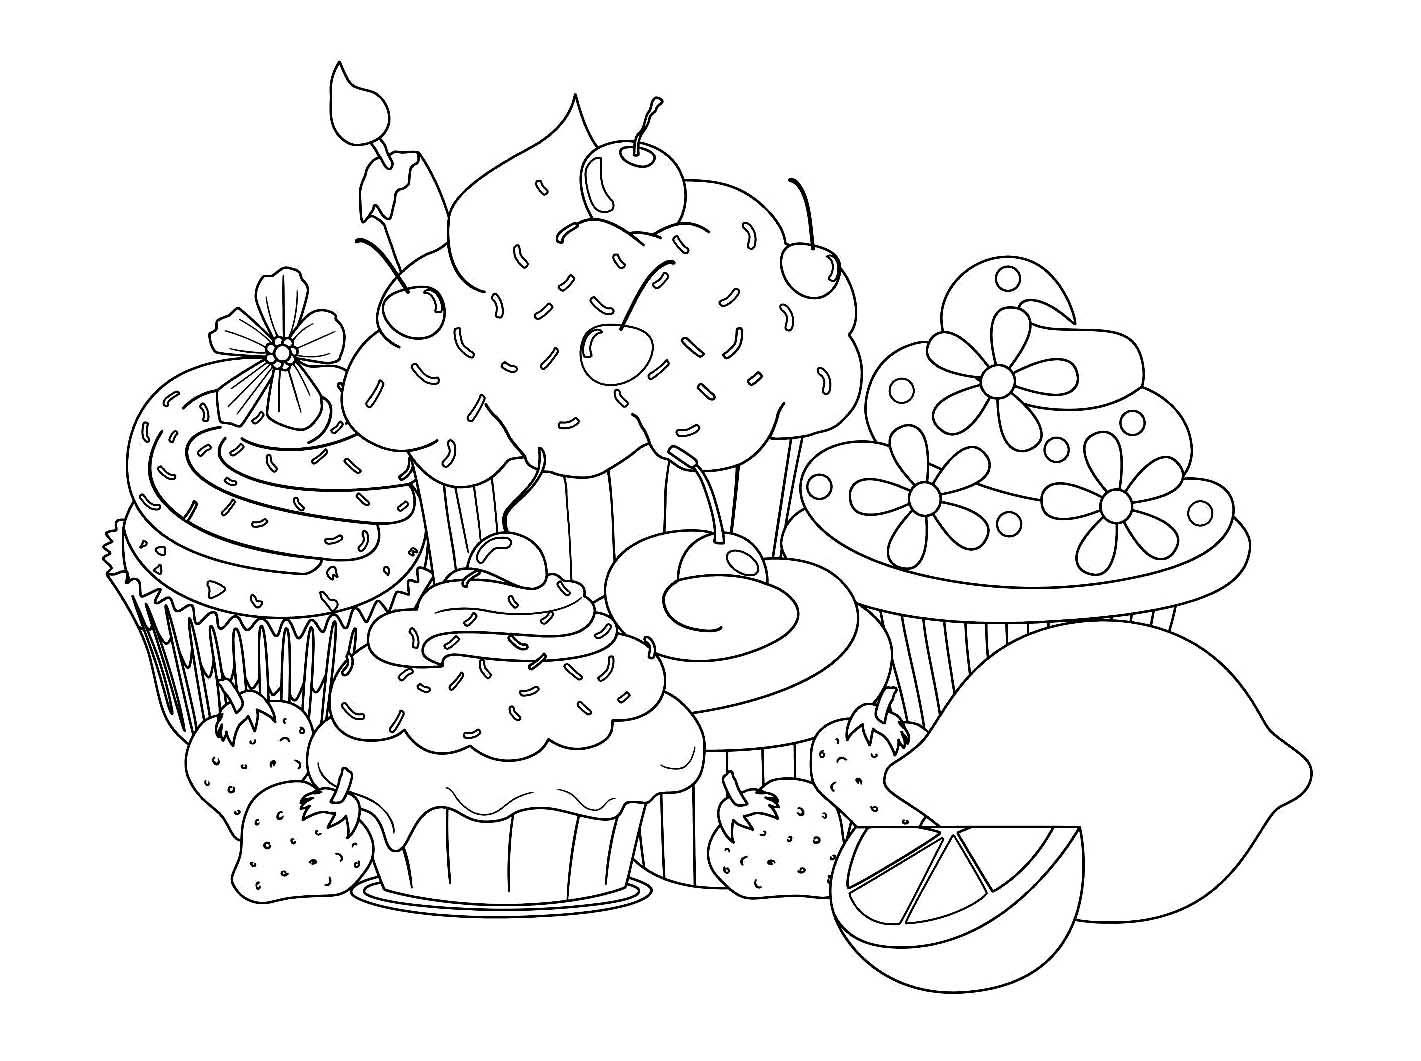 Your creations You have colored this coloring page